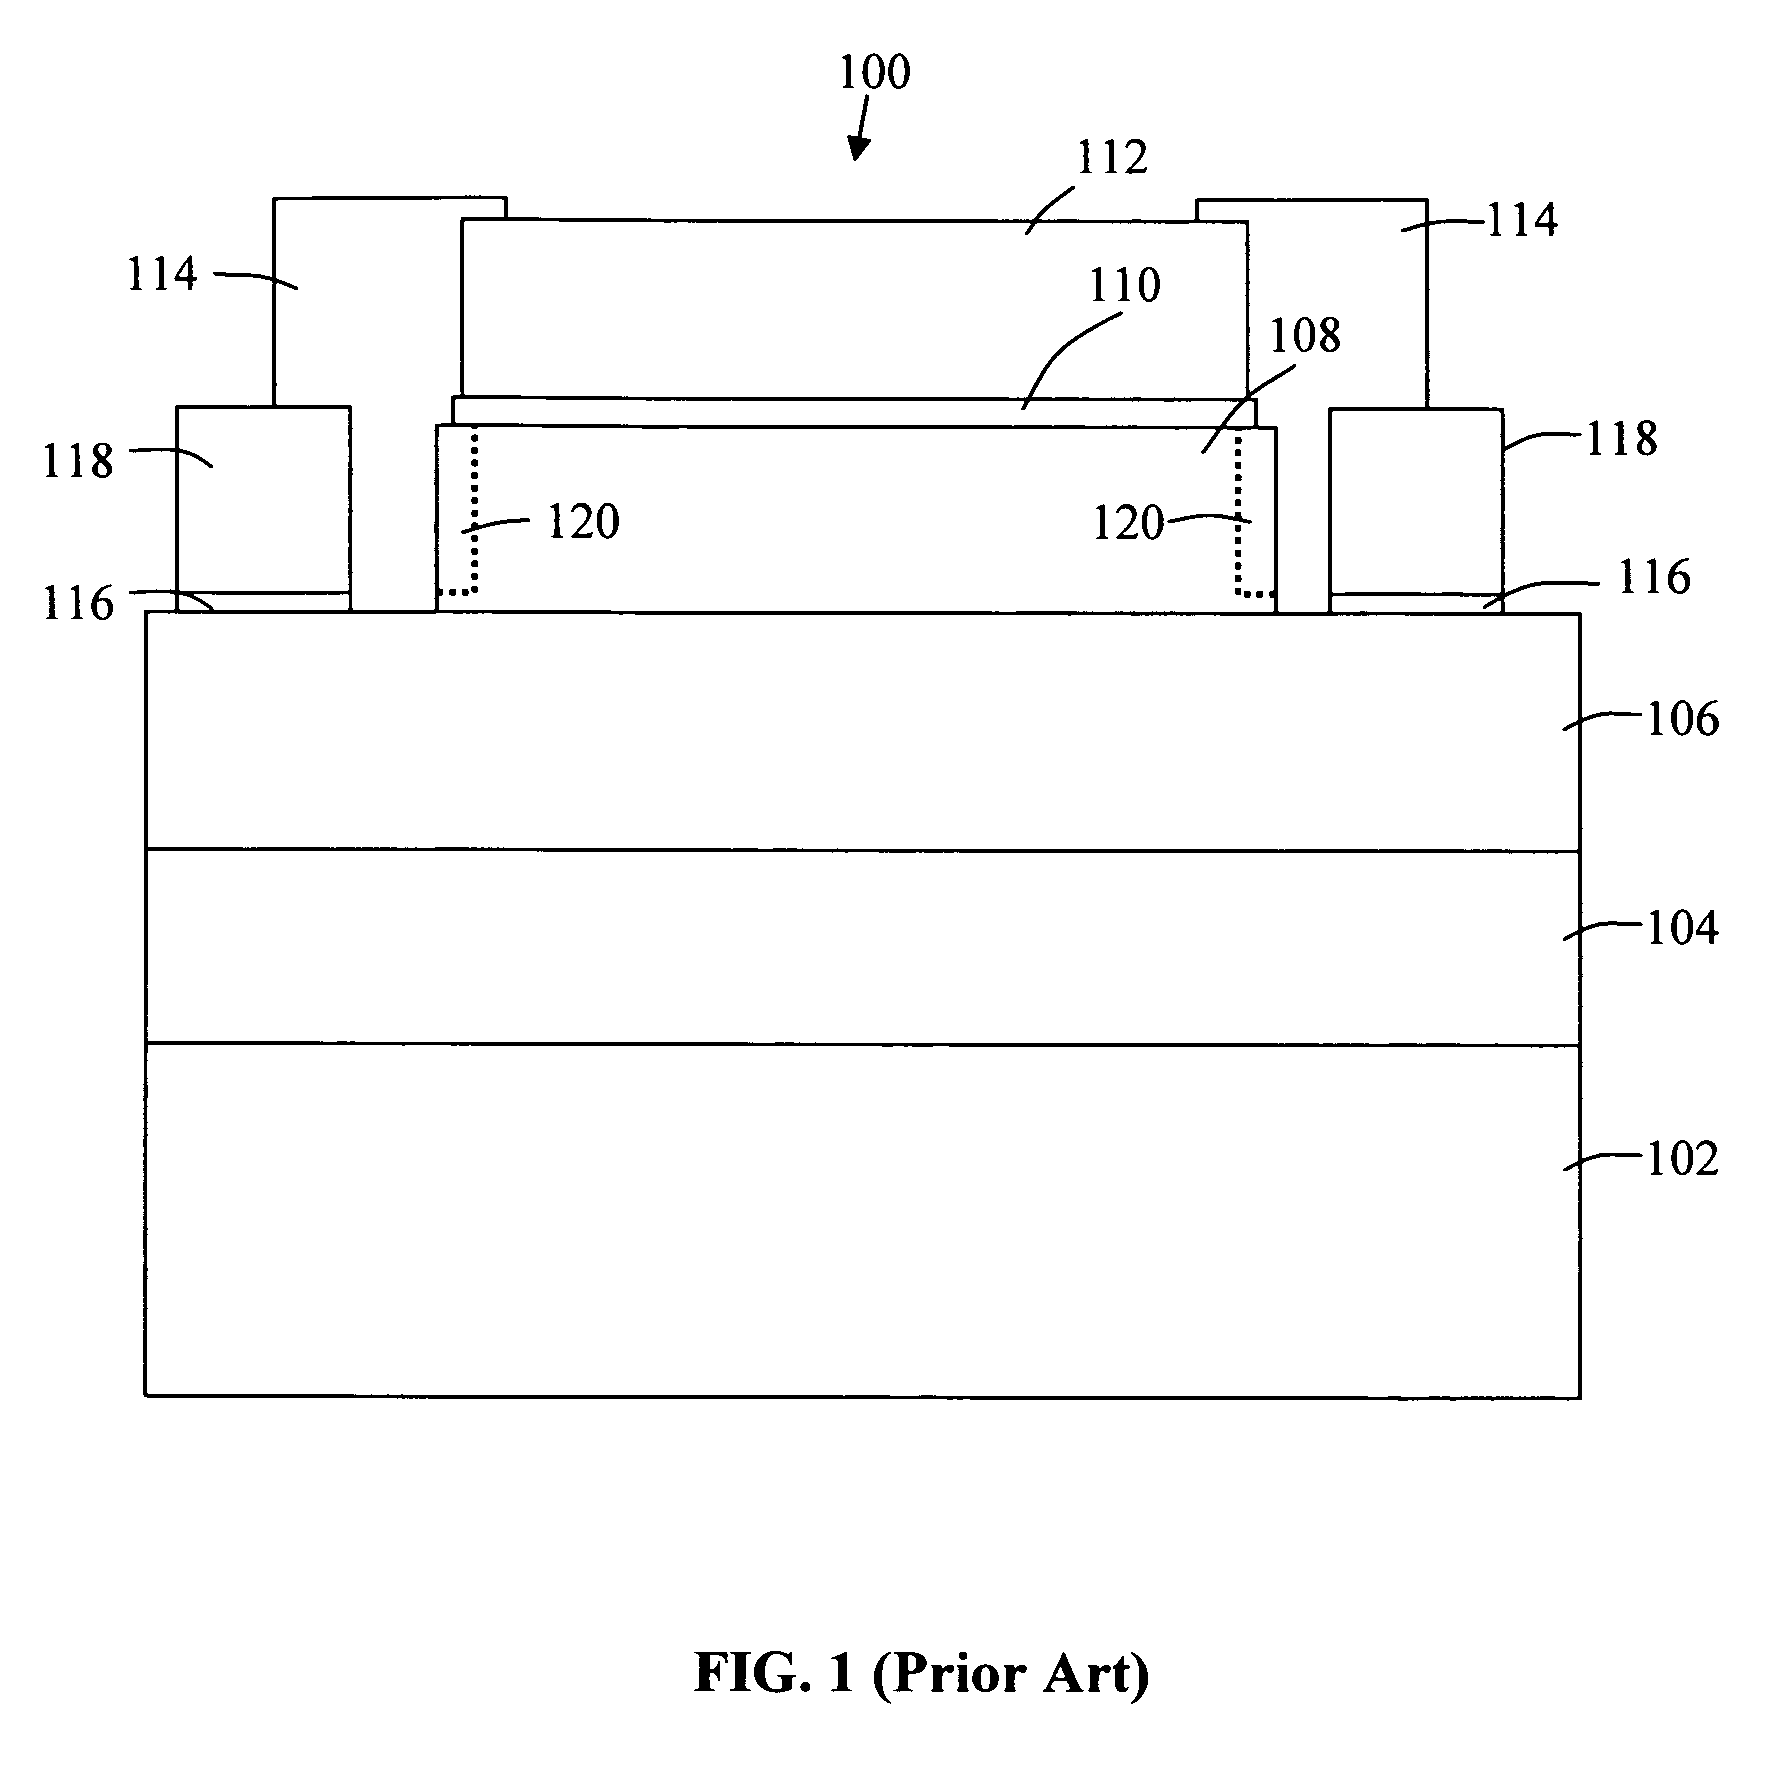 Method for manufacturing a gallium nitride based semiconductor device with improved termination scheme